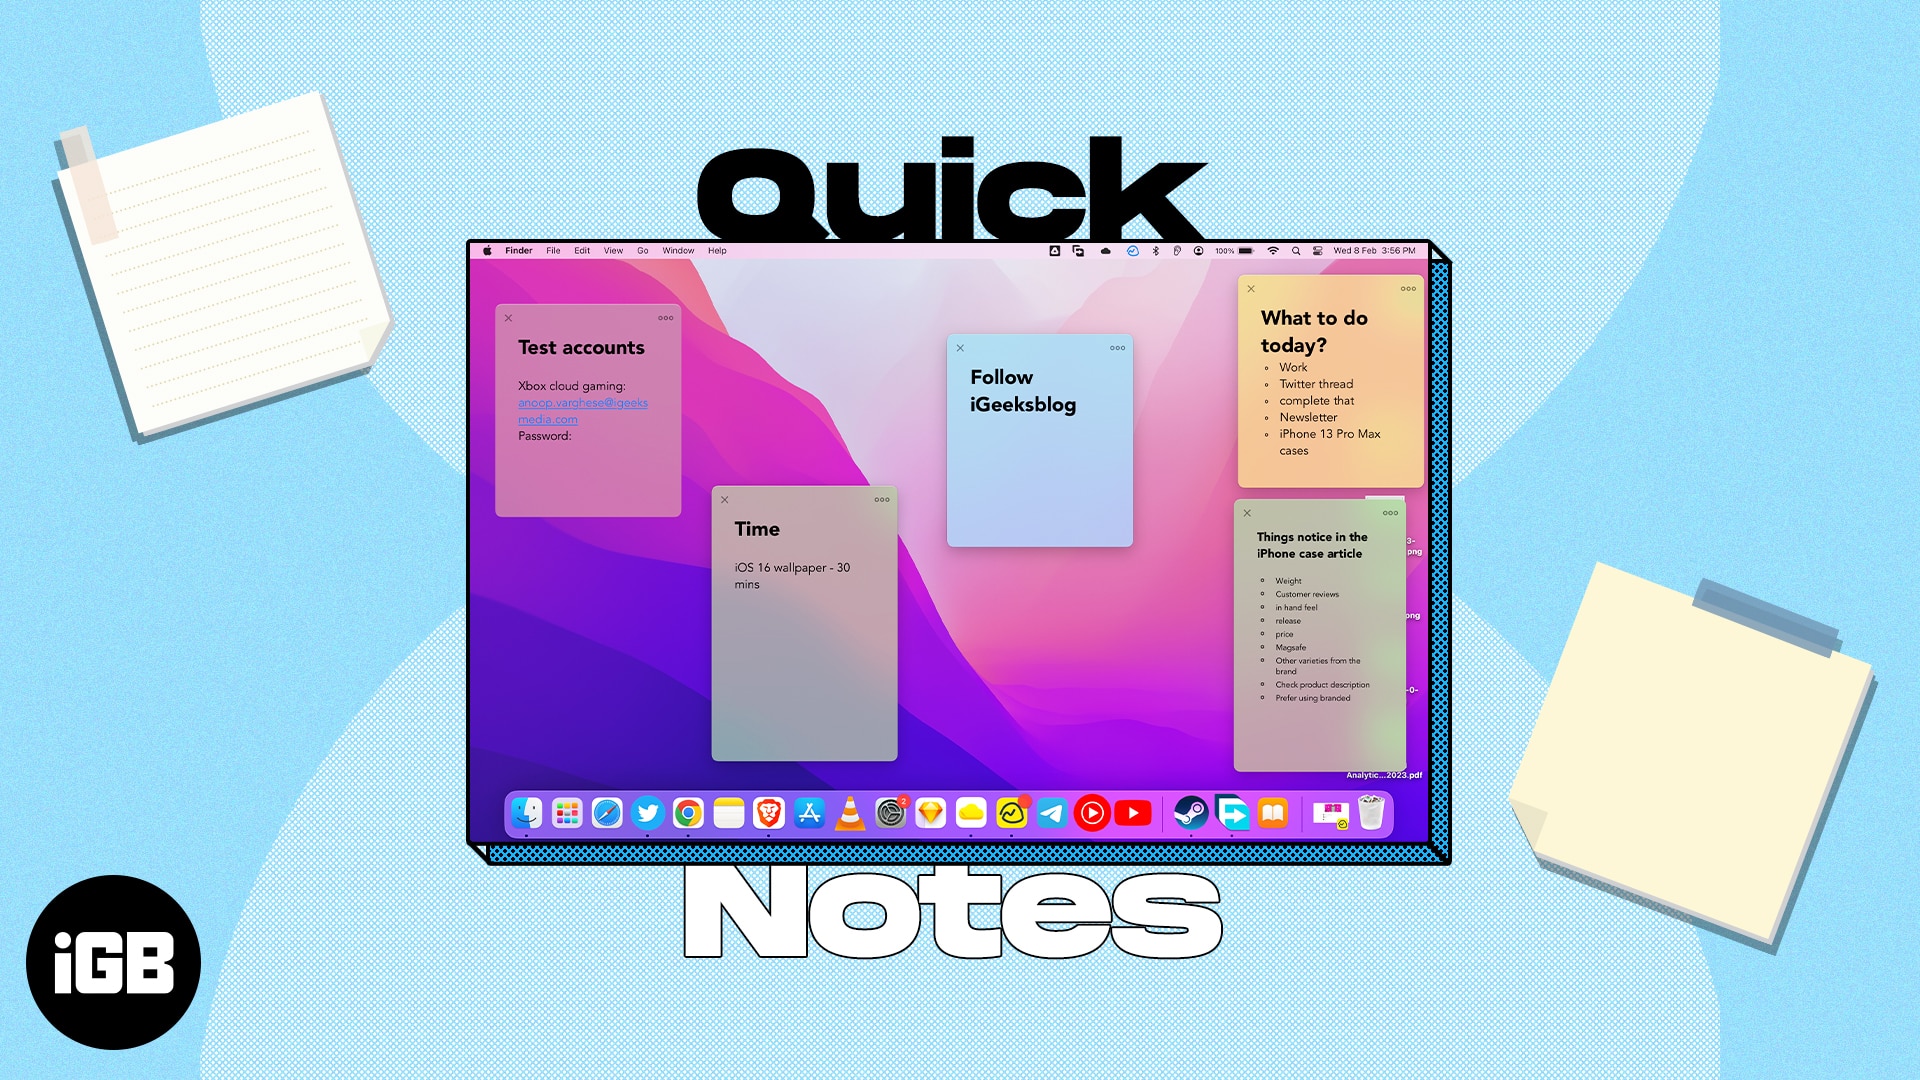 How to use quick notes on mac